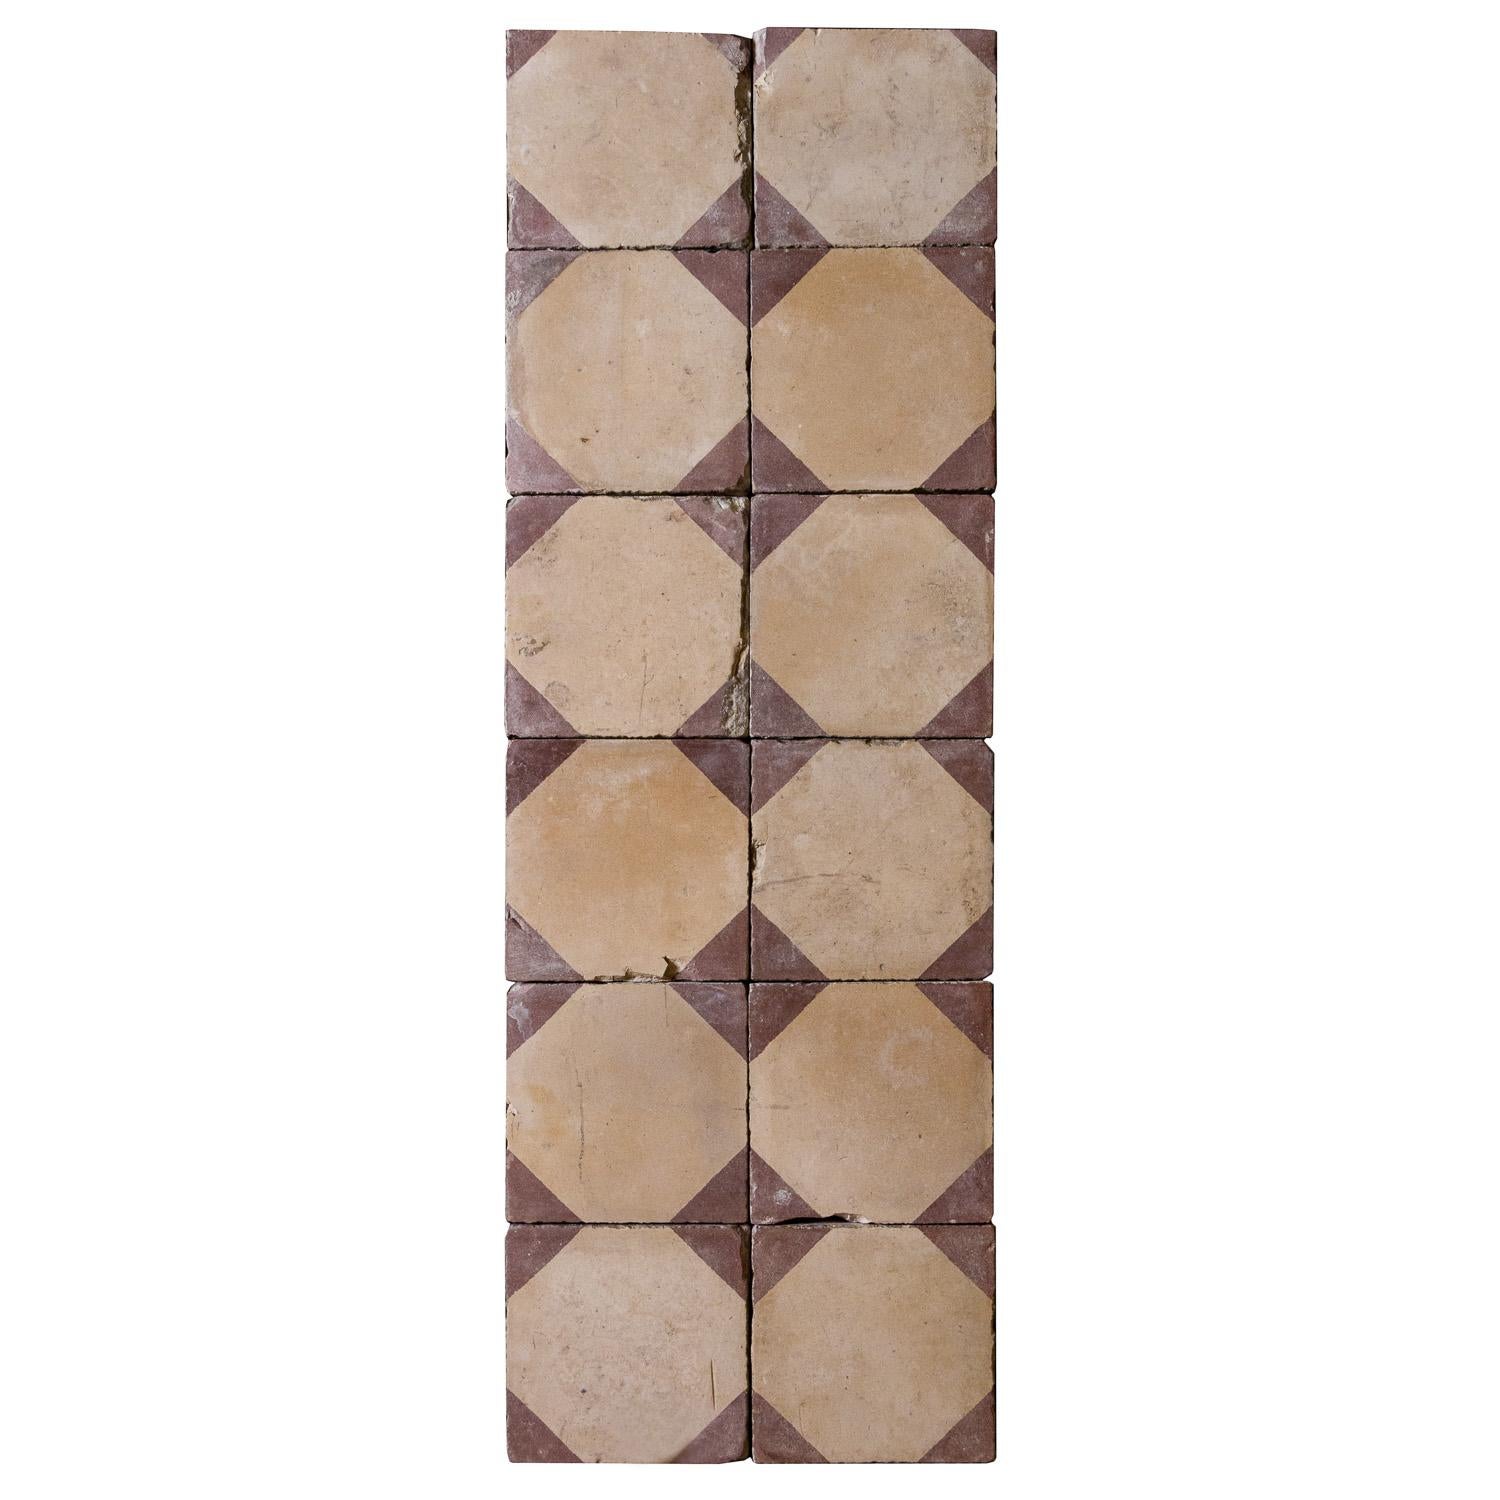 Reclaimed Red and Beige Octagonal Tiles